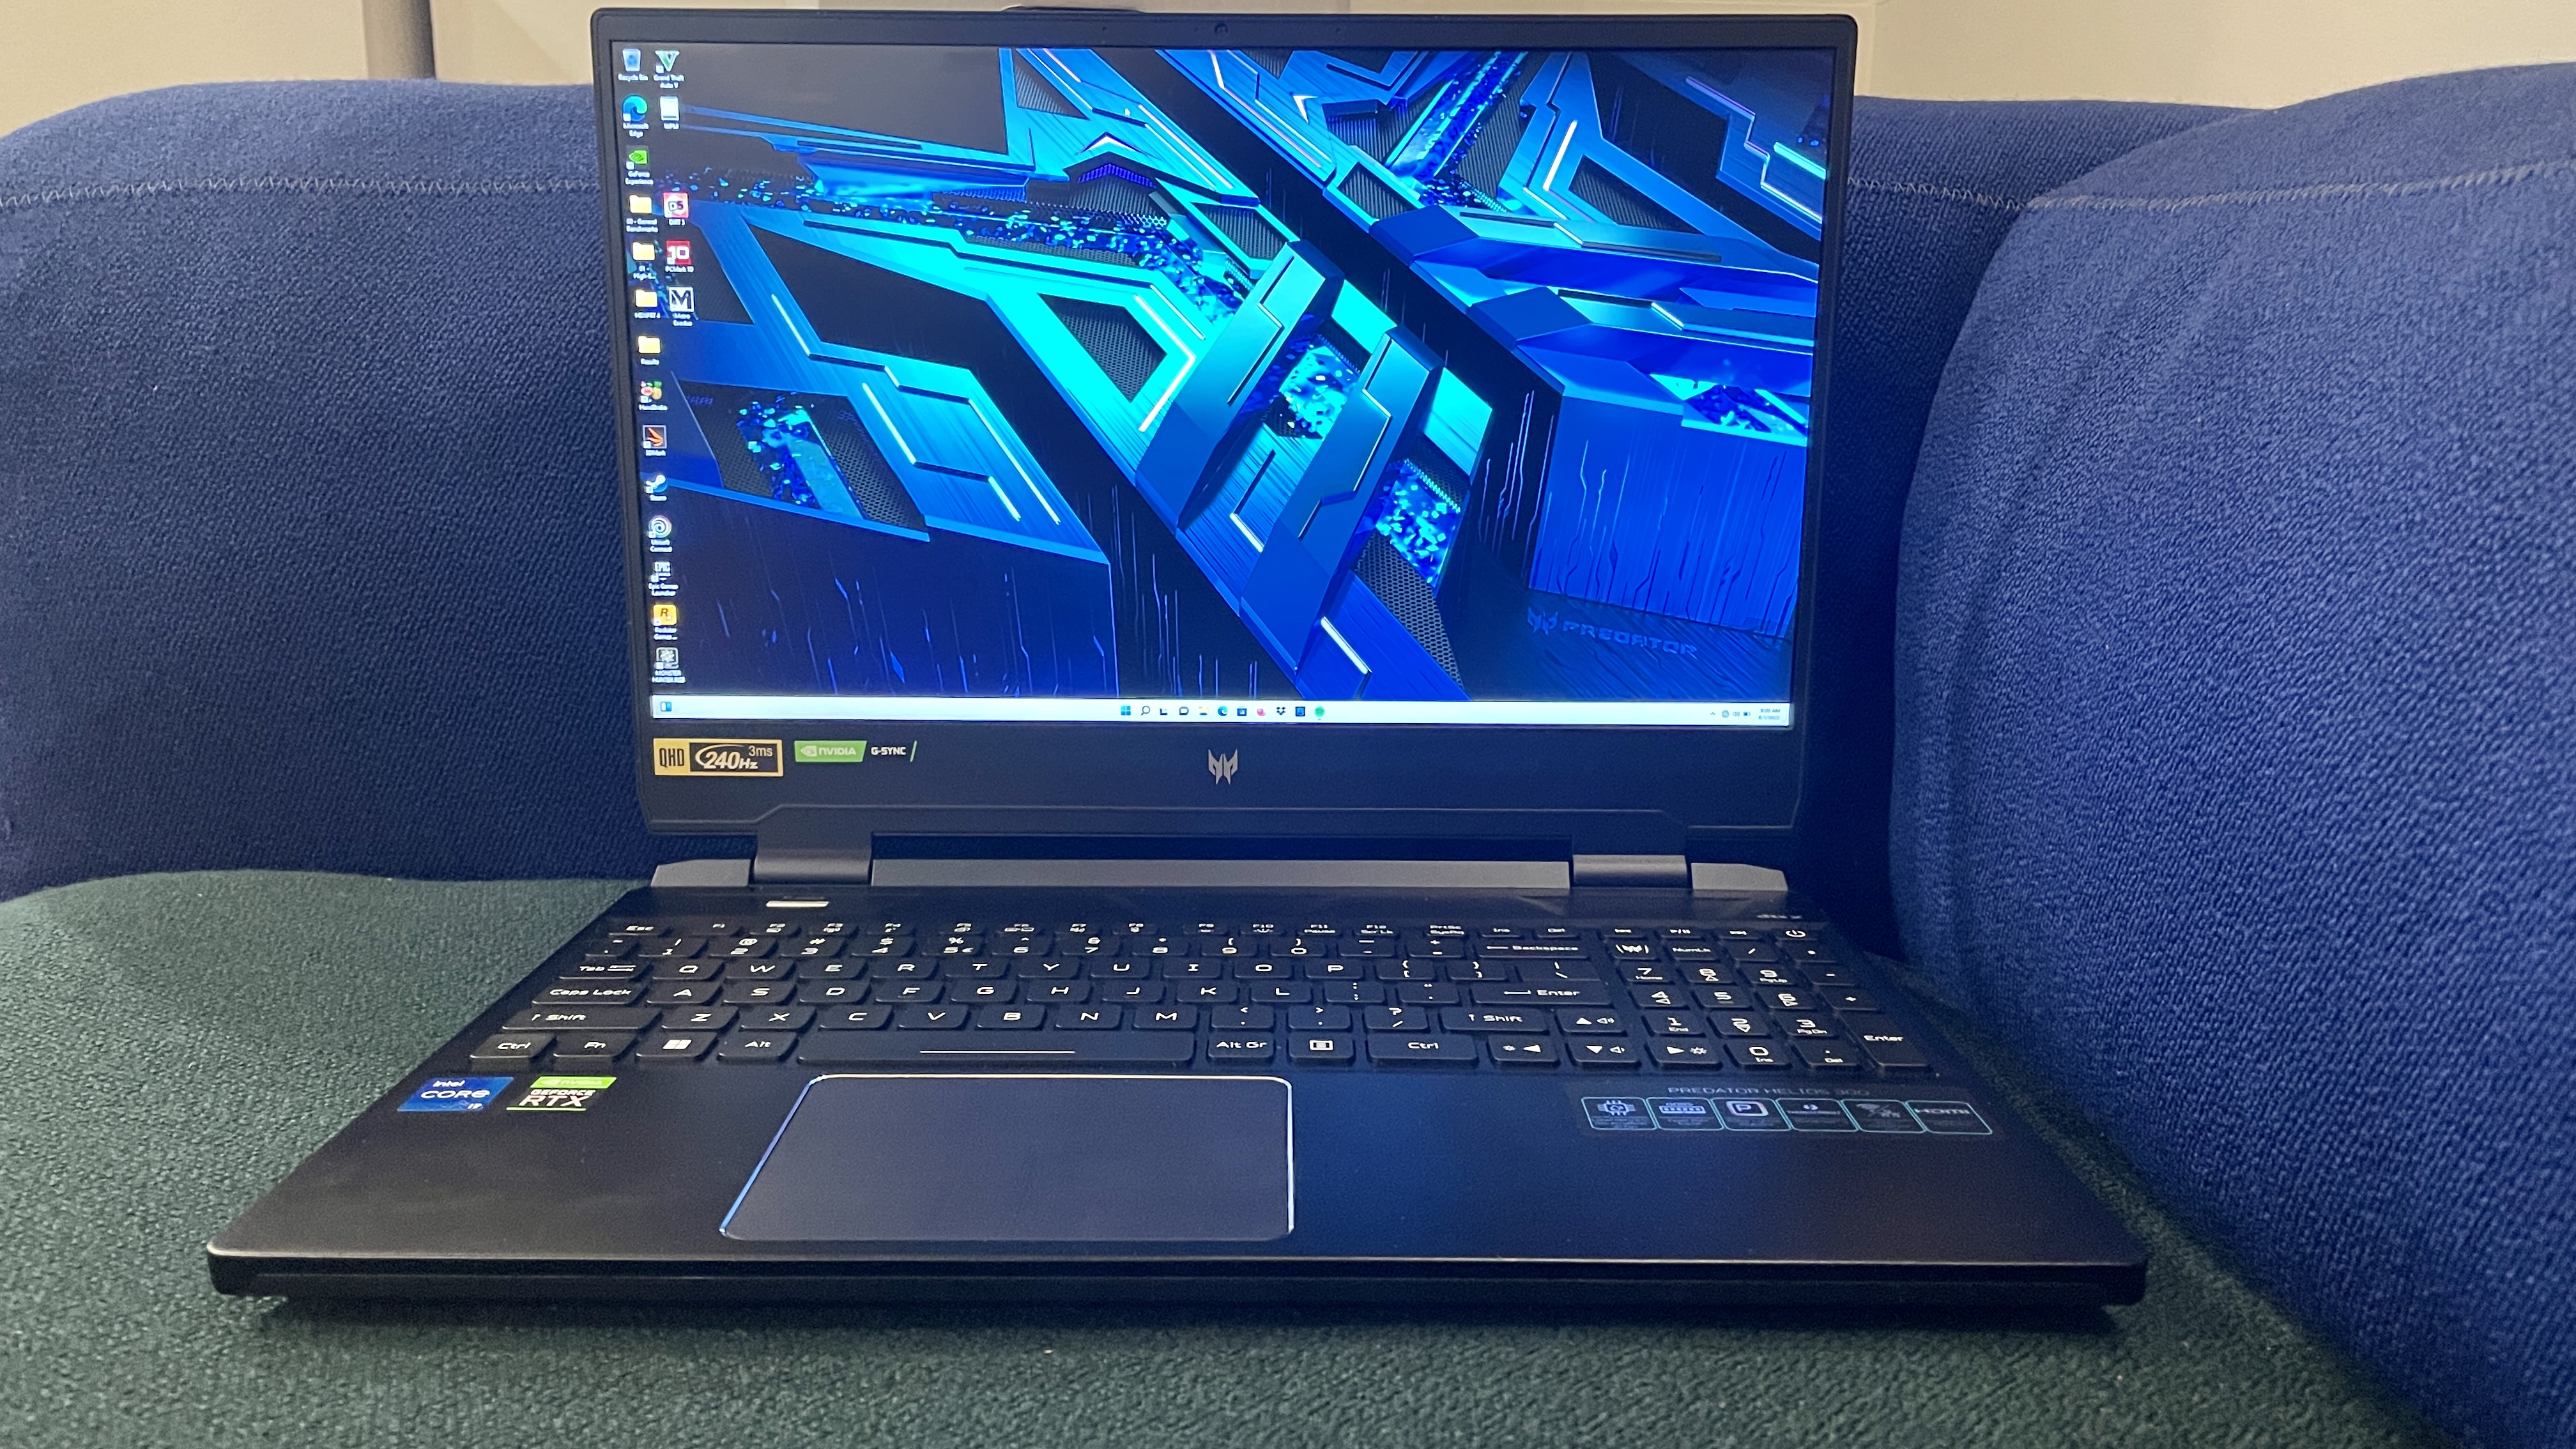 Acer Predator Helios 300 Review: An Overclockable Gaming Laptop With 144Hz  Display